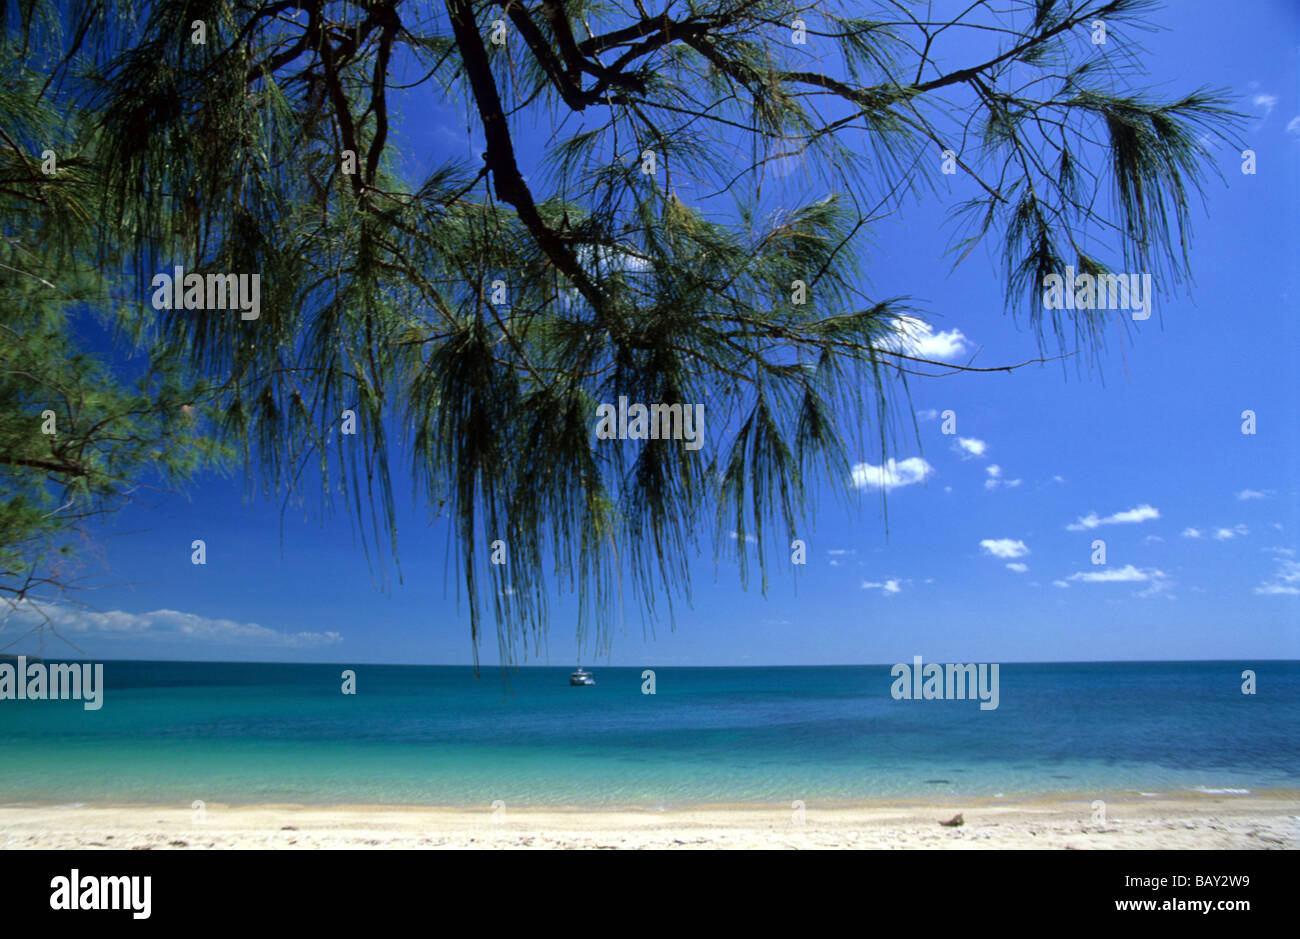 Beach on Wigram island, one of the islands in the archipelago of the English Compan's Islands, Australia Stock Photo